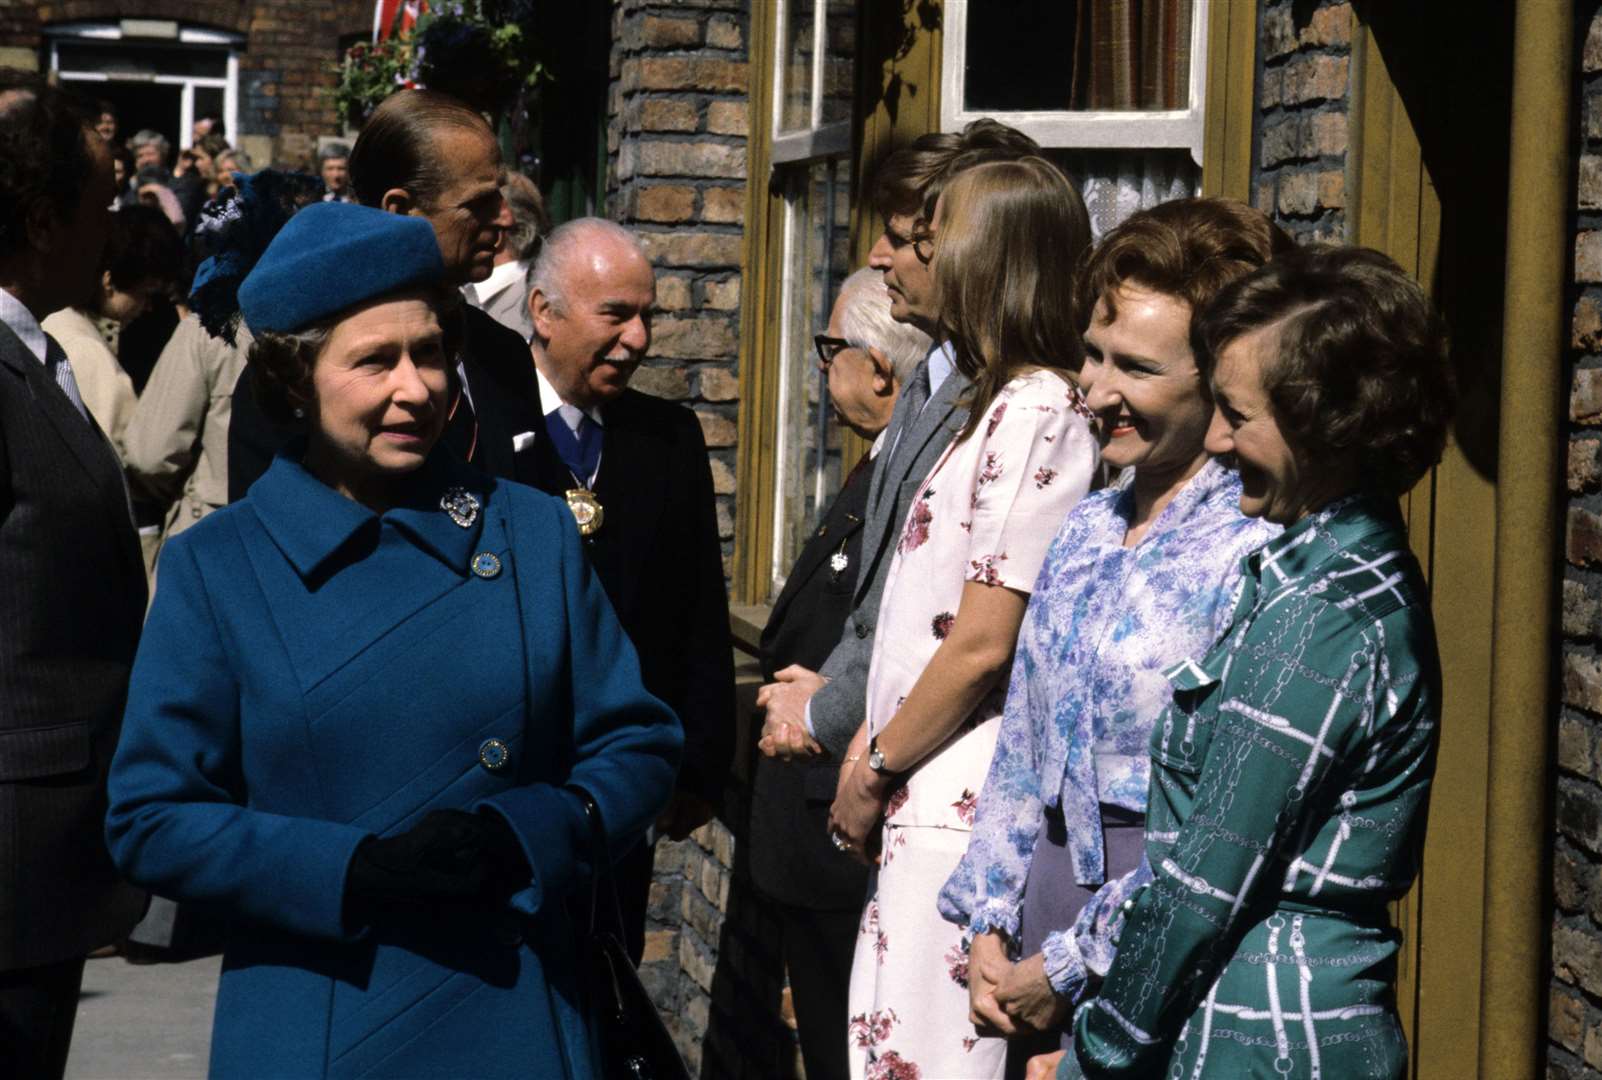 The Queen visits the recently rebuilt set of ITV’s Coronation Street in May 1982 and meets some of the cast; from left to right: Jack Howarth, William Roache, Anne Kirkbride, Eileen Derbyshire and Thelma Barlow (PA)